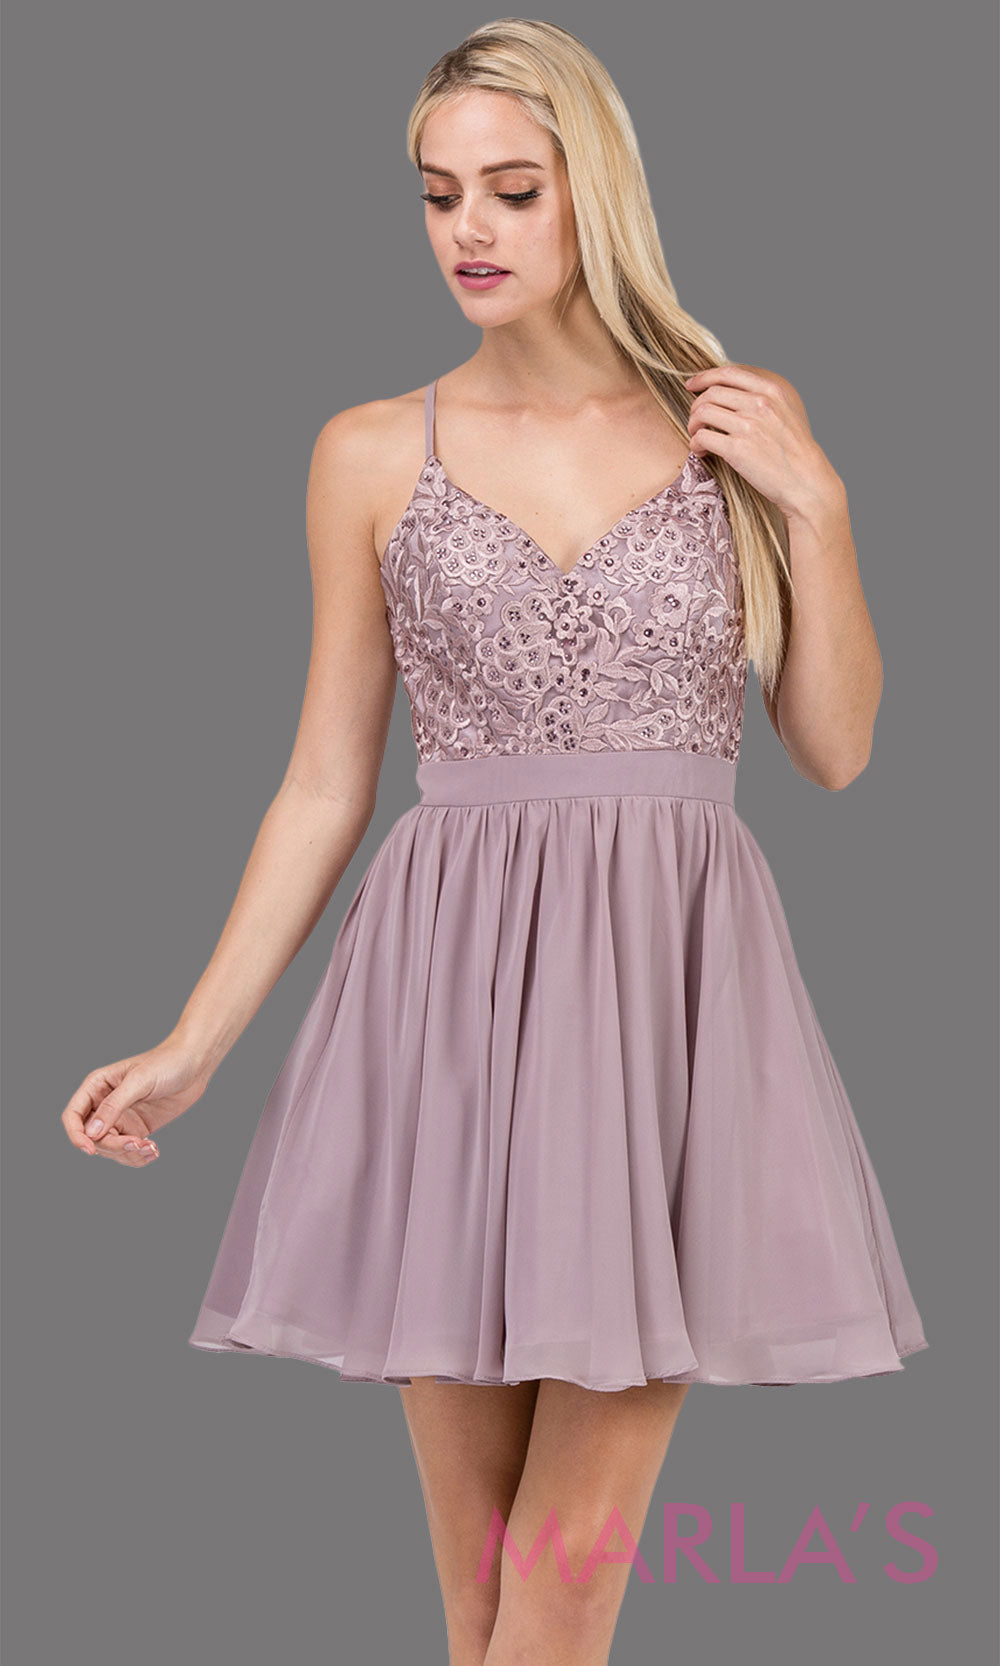 3088.4-Short mocha flowy chiffon grade 8 grad dress with straps and lace.This v neck neutral graduation dress is great for quinceanera damas, confirmation,bat mitzvah,junior bridesmaid. Plus size Avail